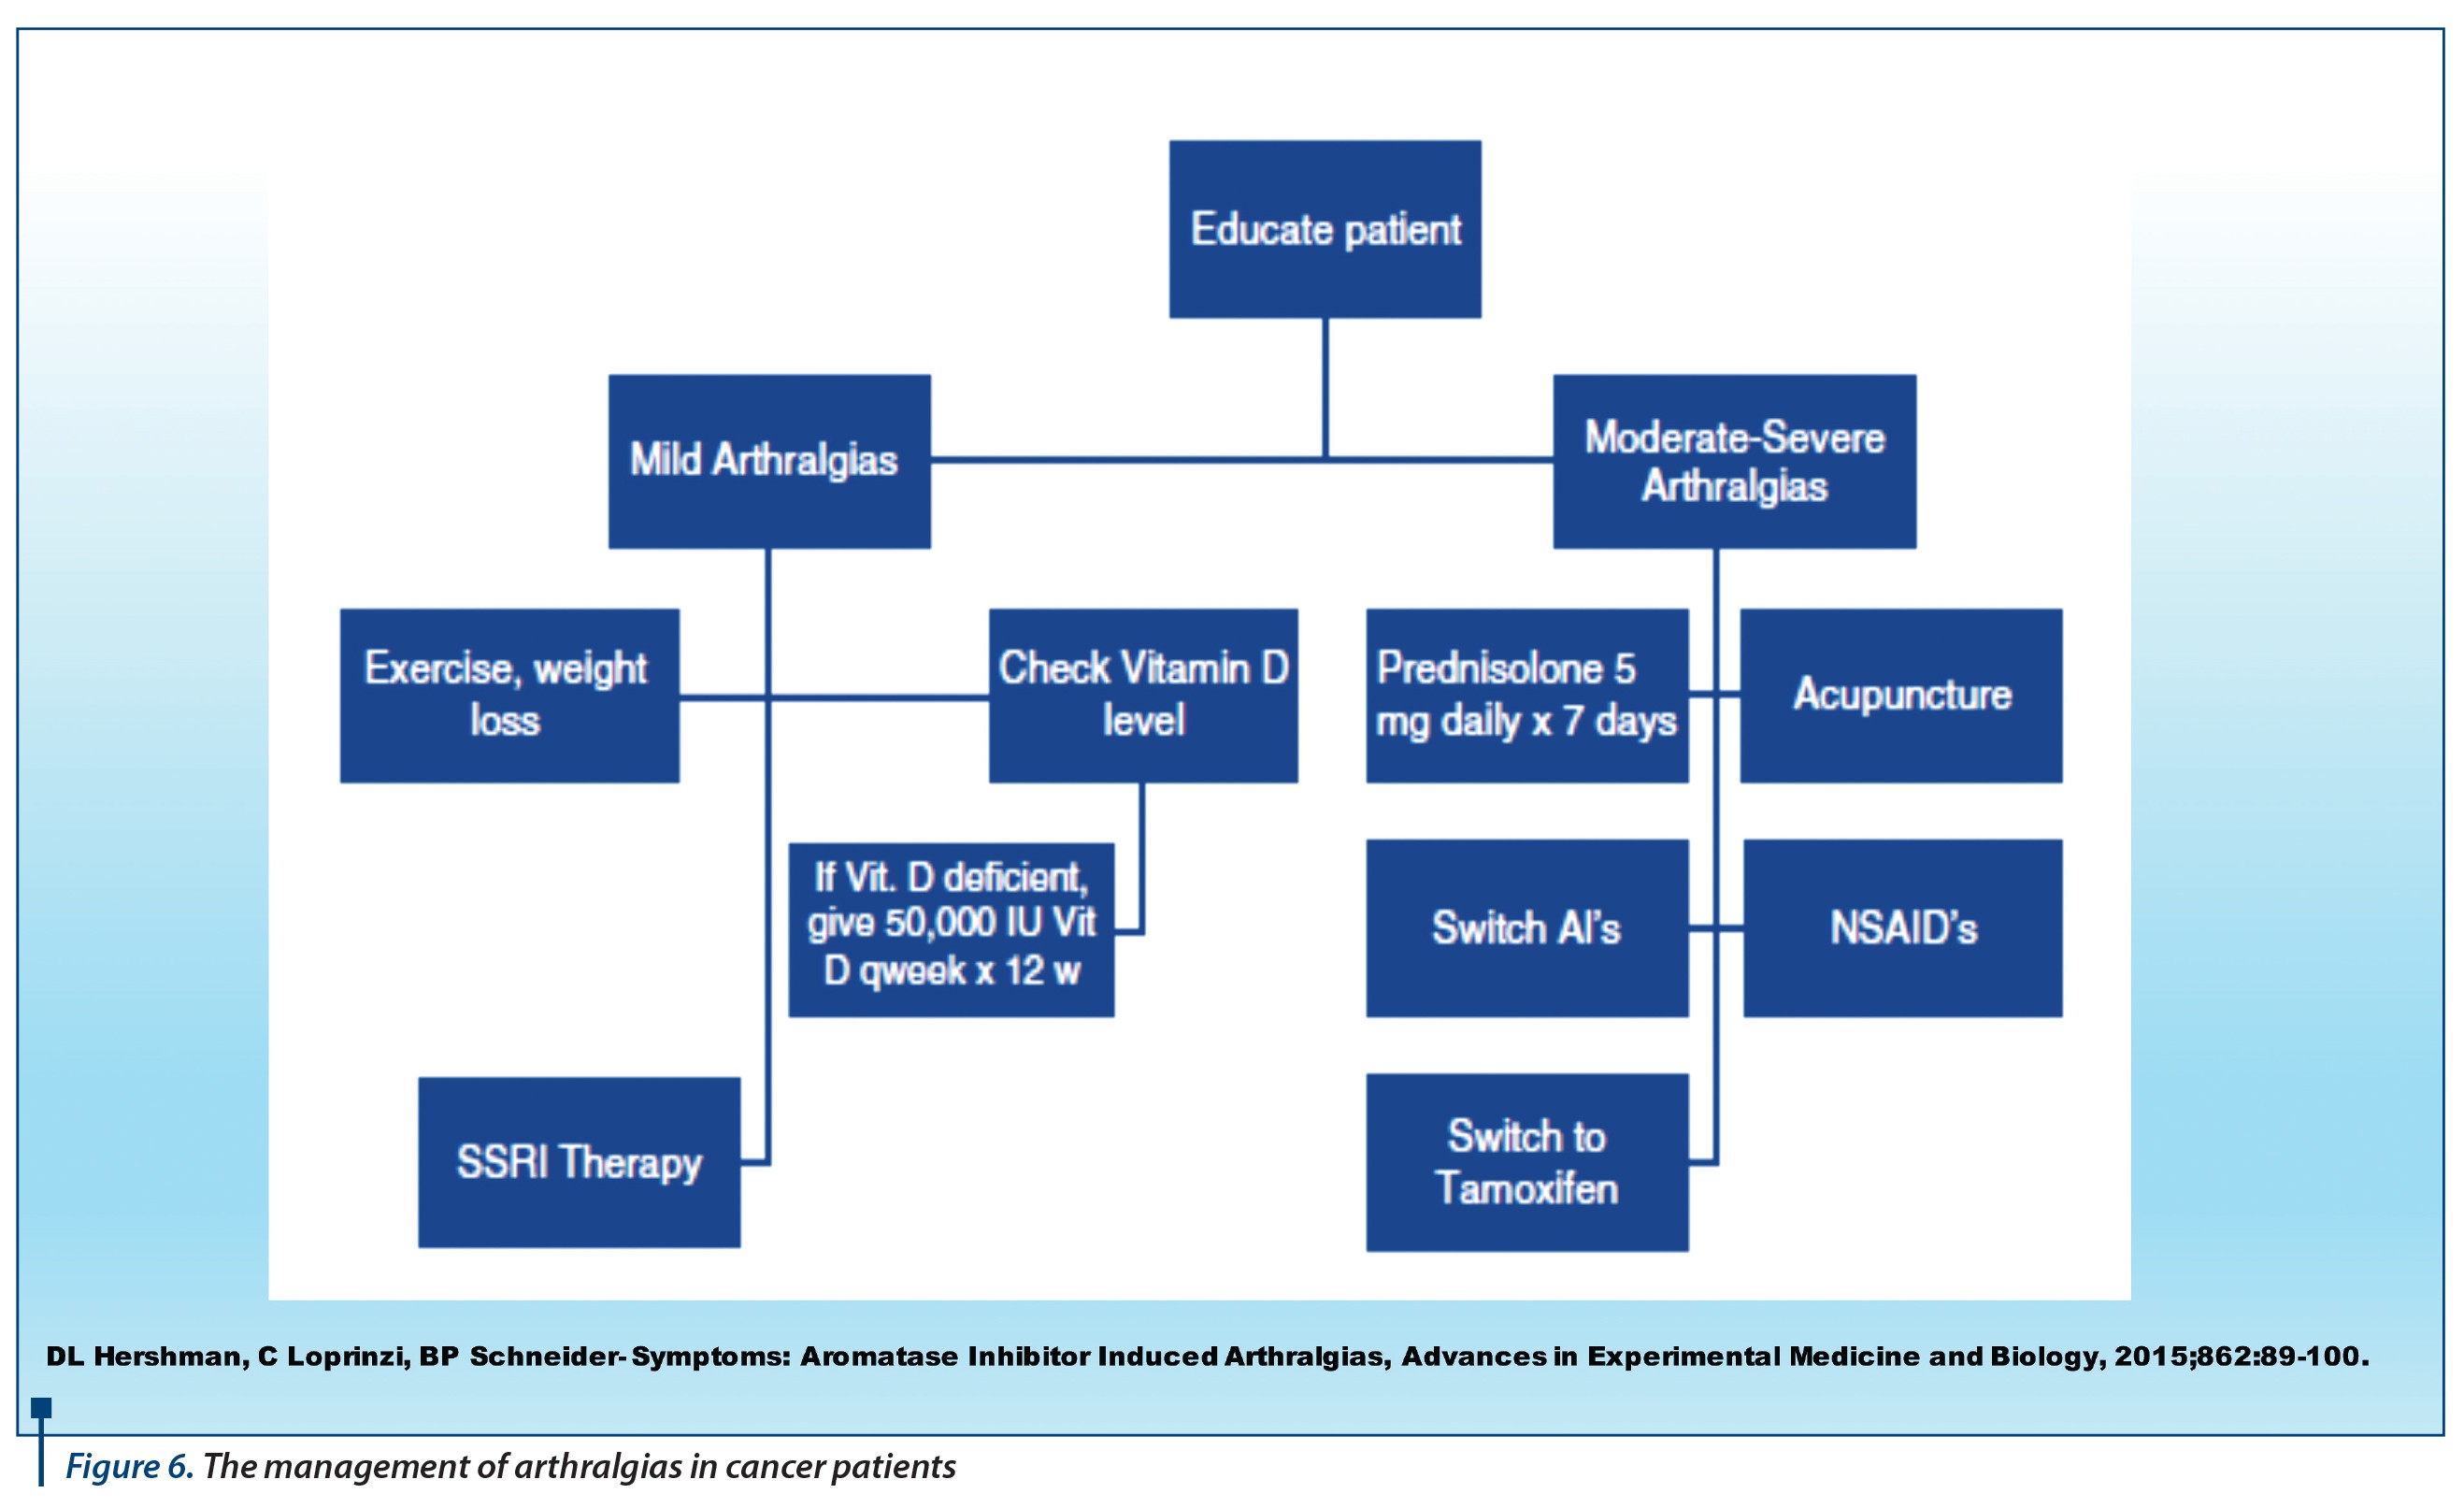 Figure 6. The management of arthralgias in cancer patients